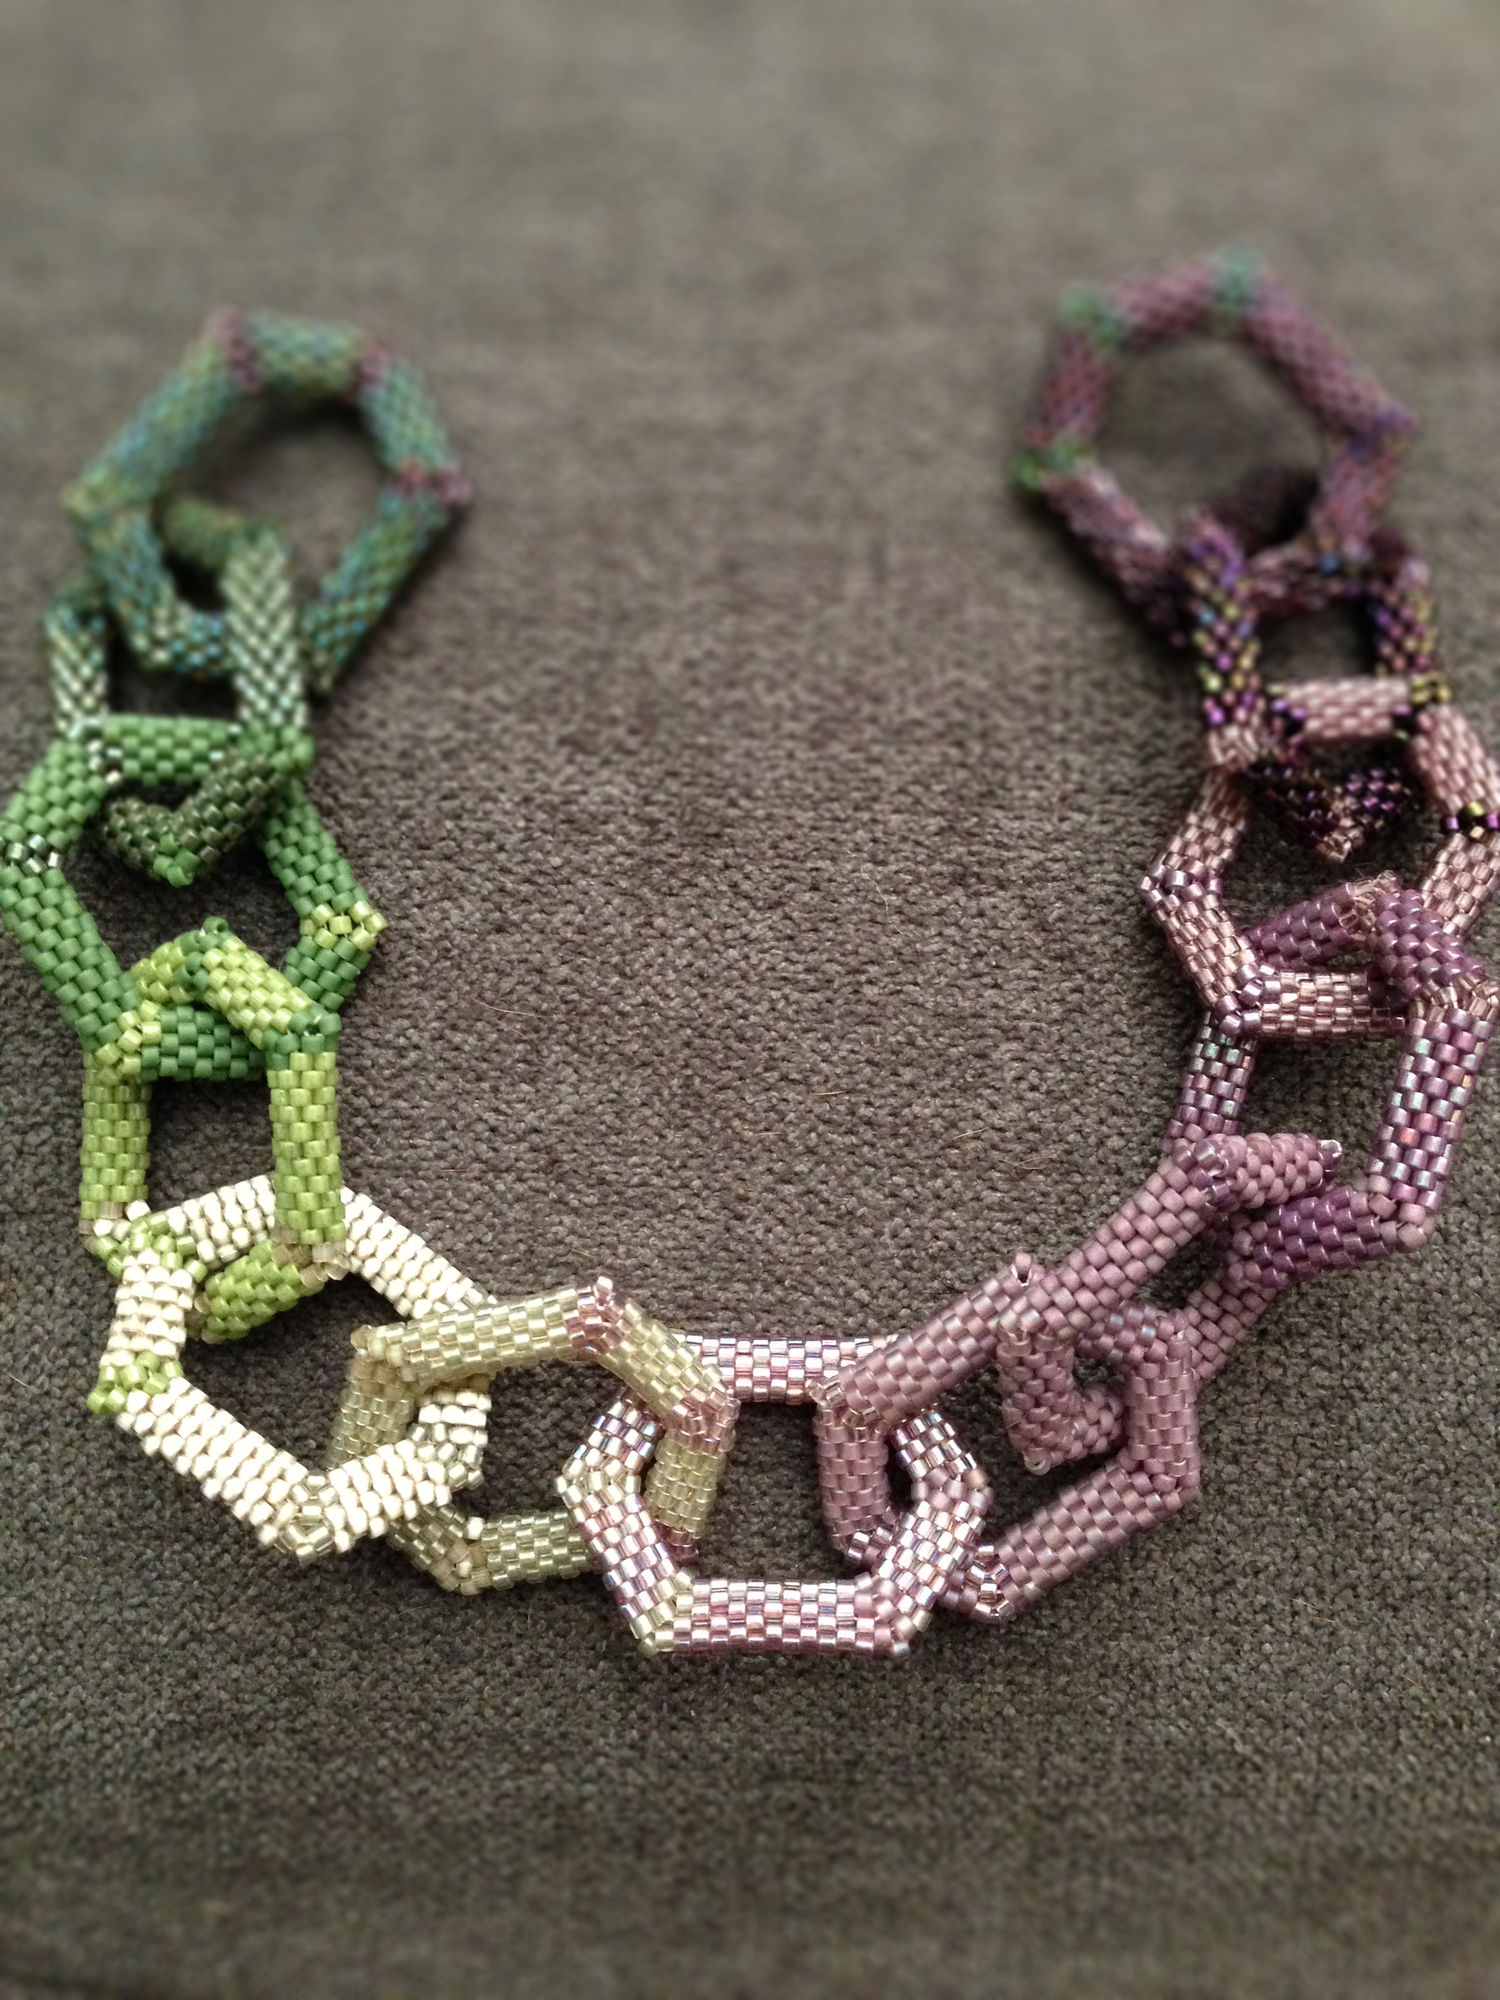 A string of peyote hexagons in a spectrum from dark green to light green to pale silver to lavender to dark purple.